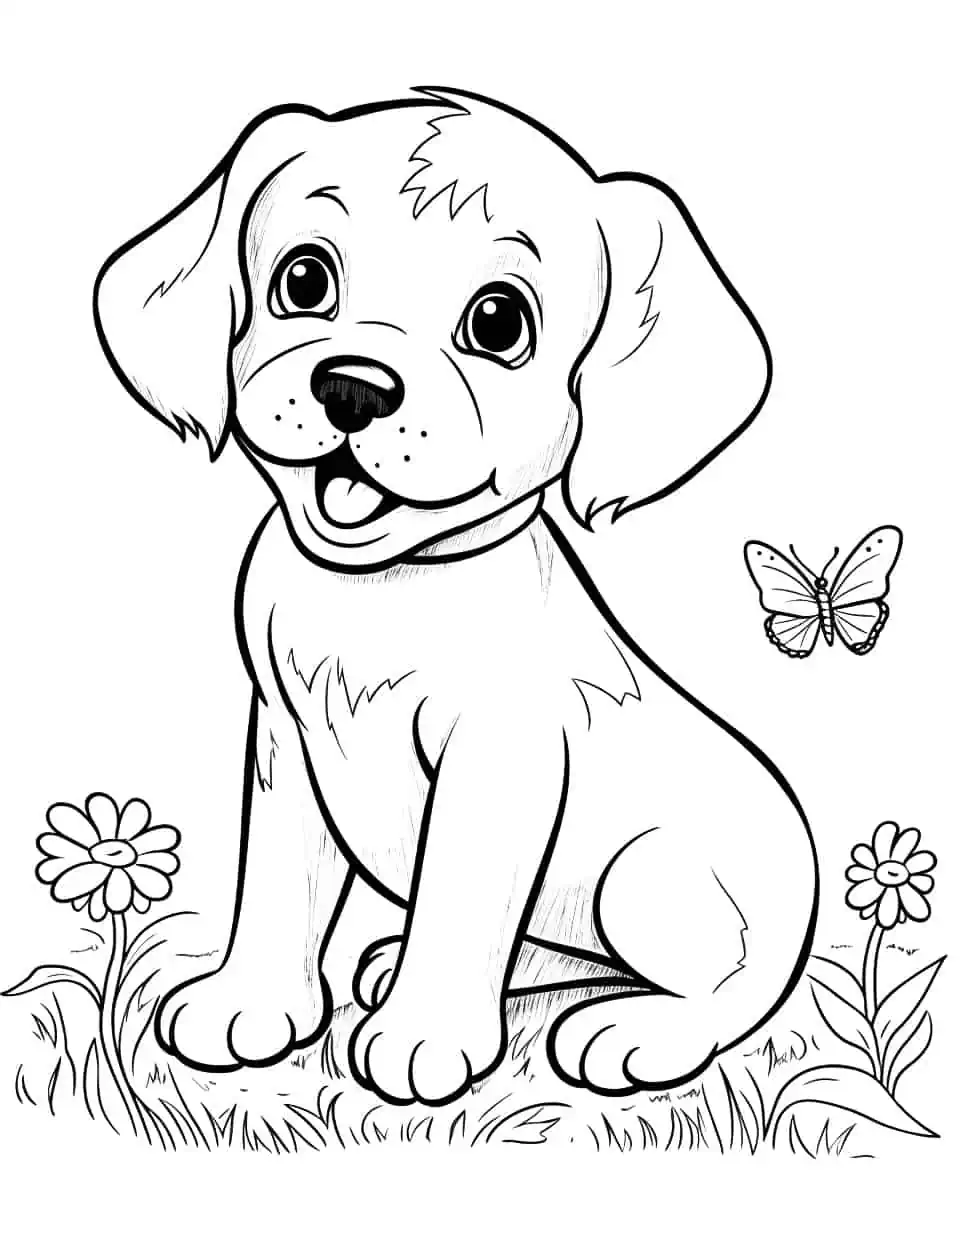 Puppy's Playdate Coloring Page - A puppy playing with a butterfly in a field full of flowers.